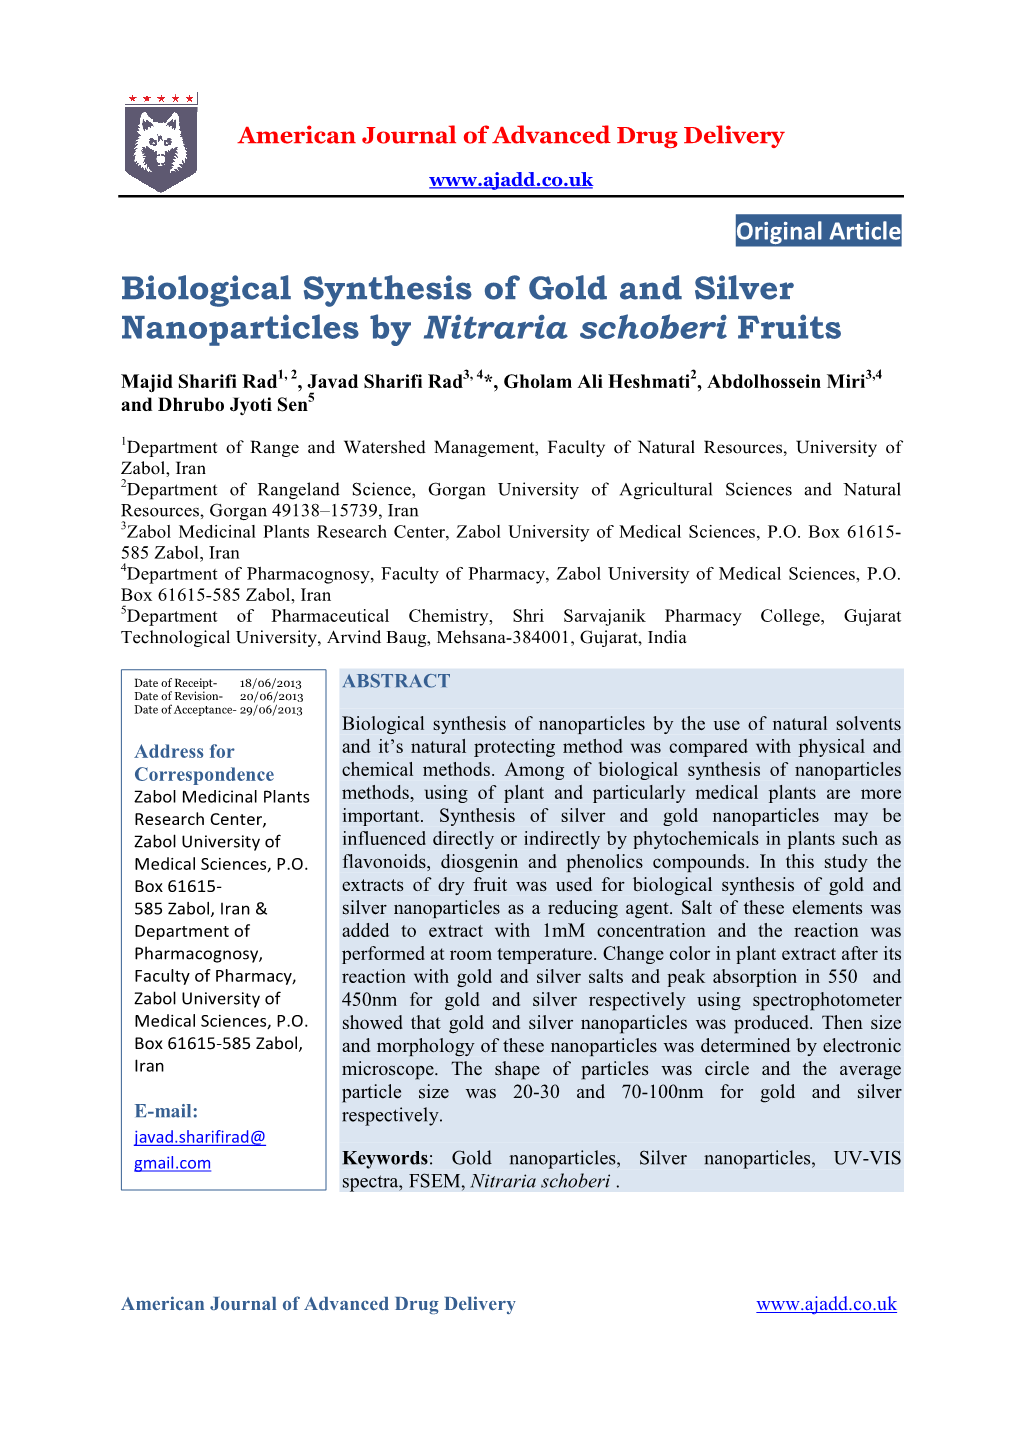 Biological Synthesis of Gold and Silver Nanoparticles by Nitraria Schoberi Fruits